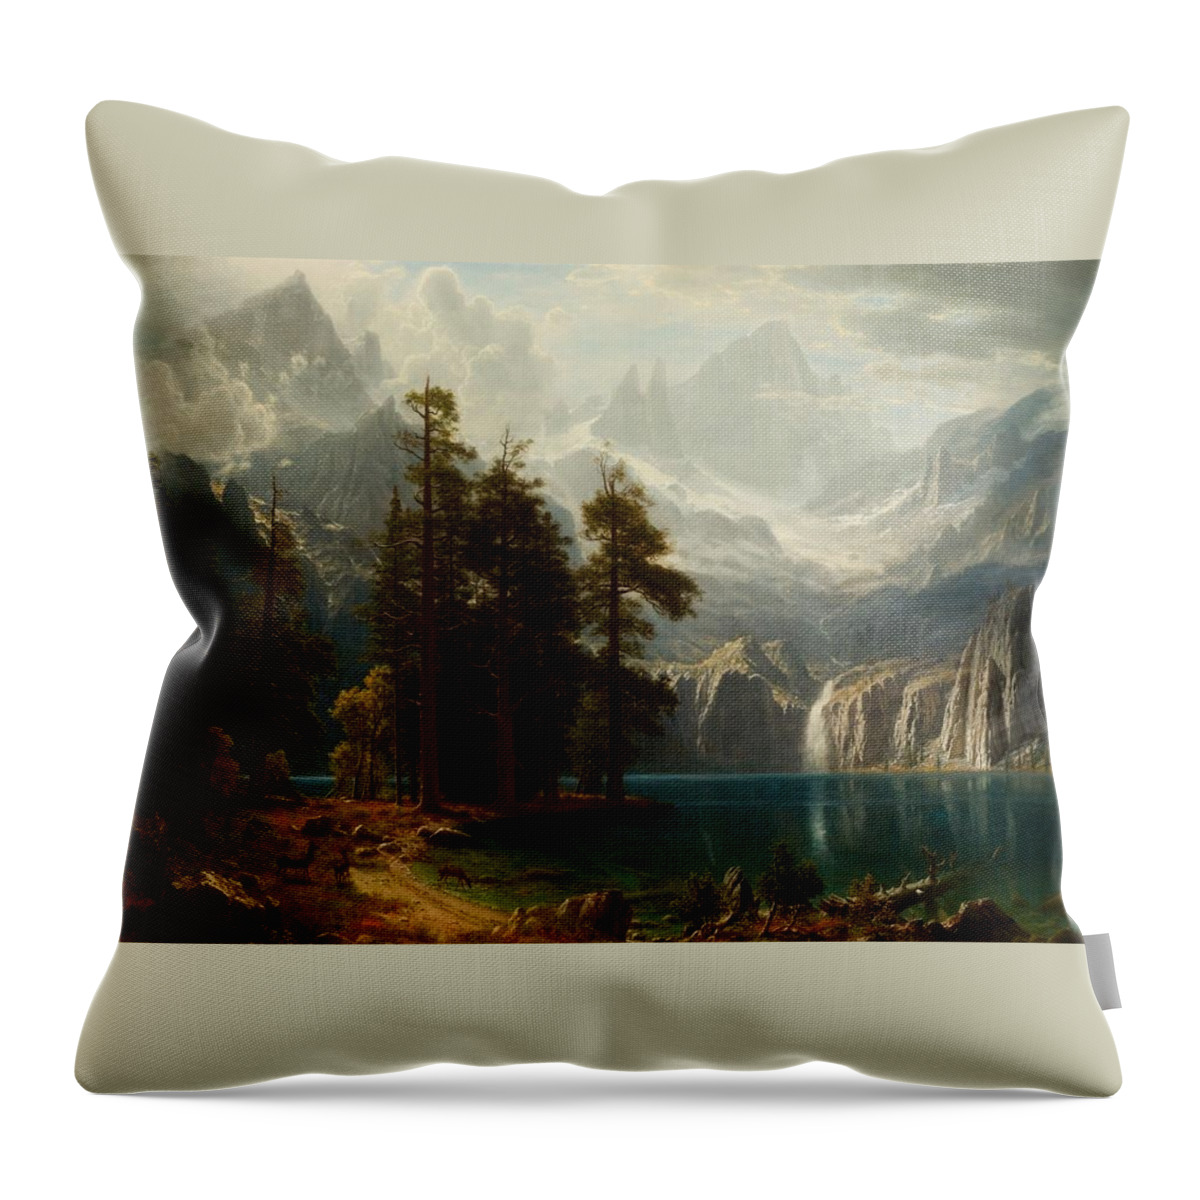 Sierra Nevada Throw Pillow featuring the painting Sierra Nevada by MotionAge Designs